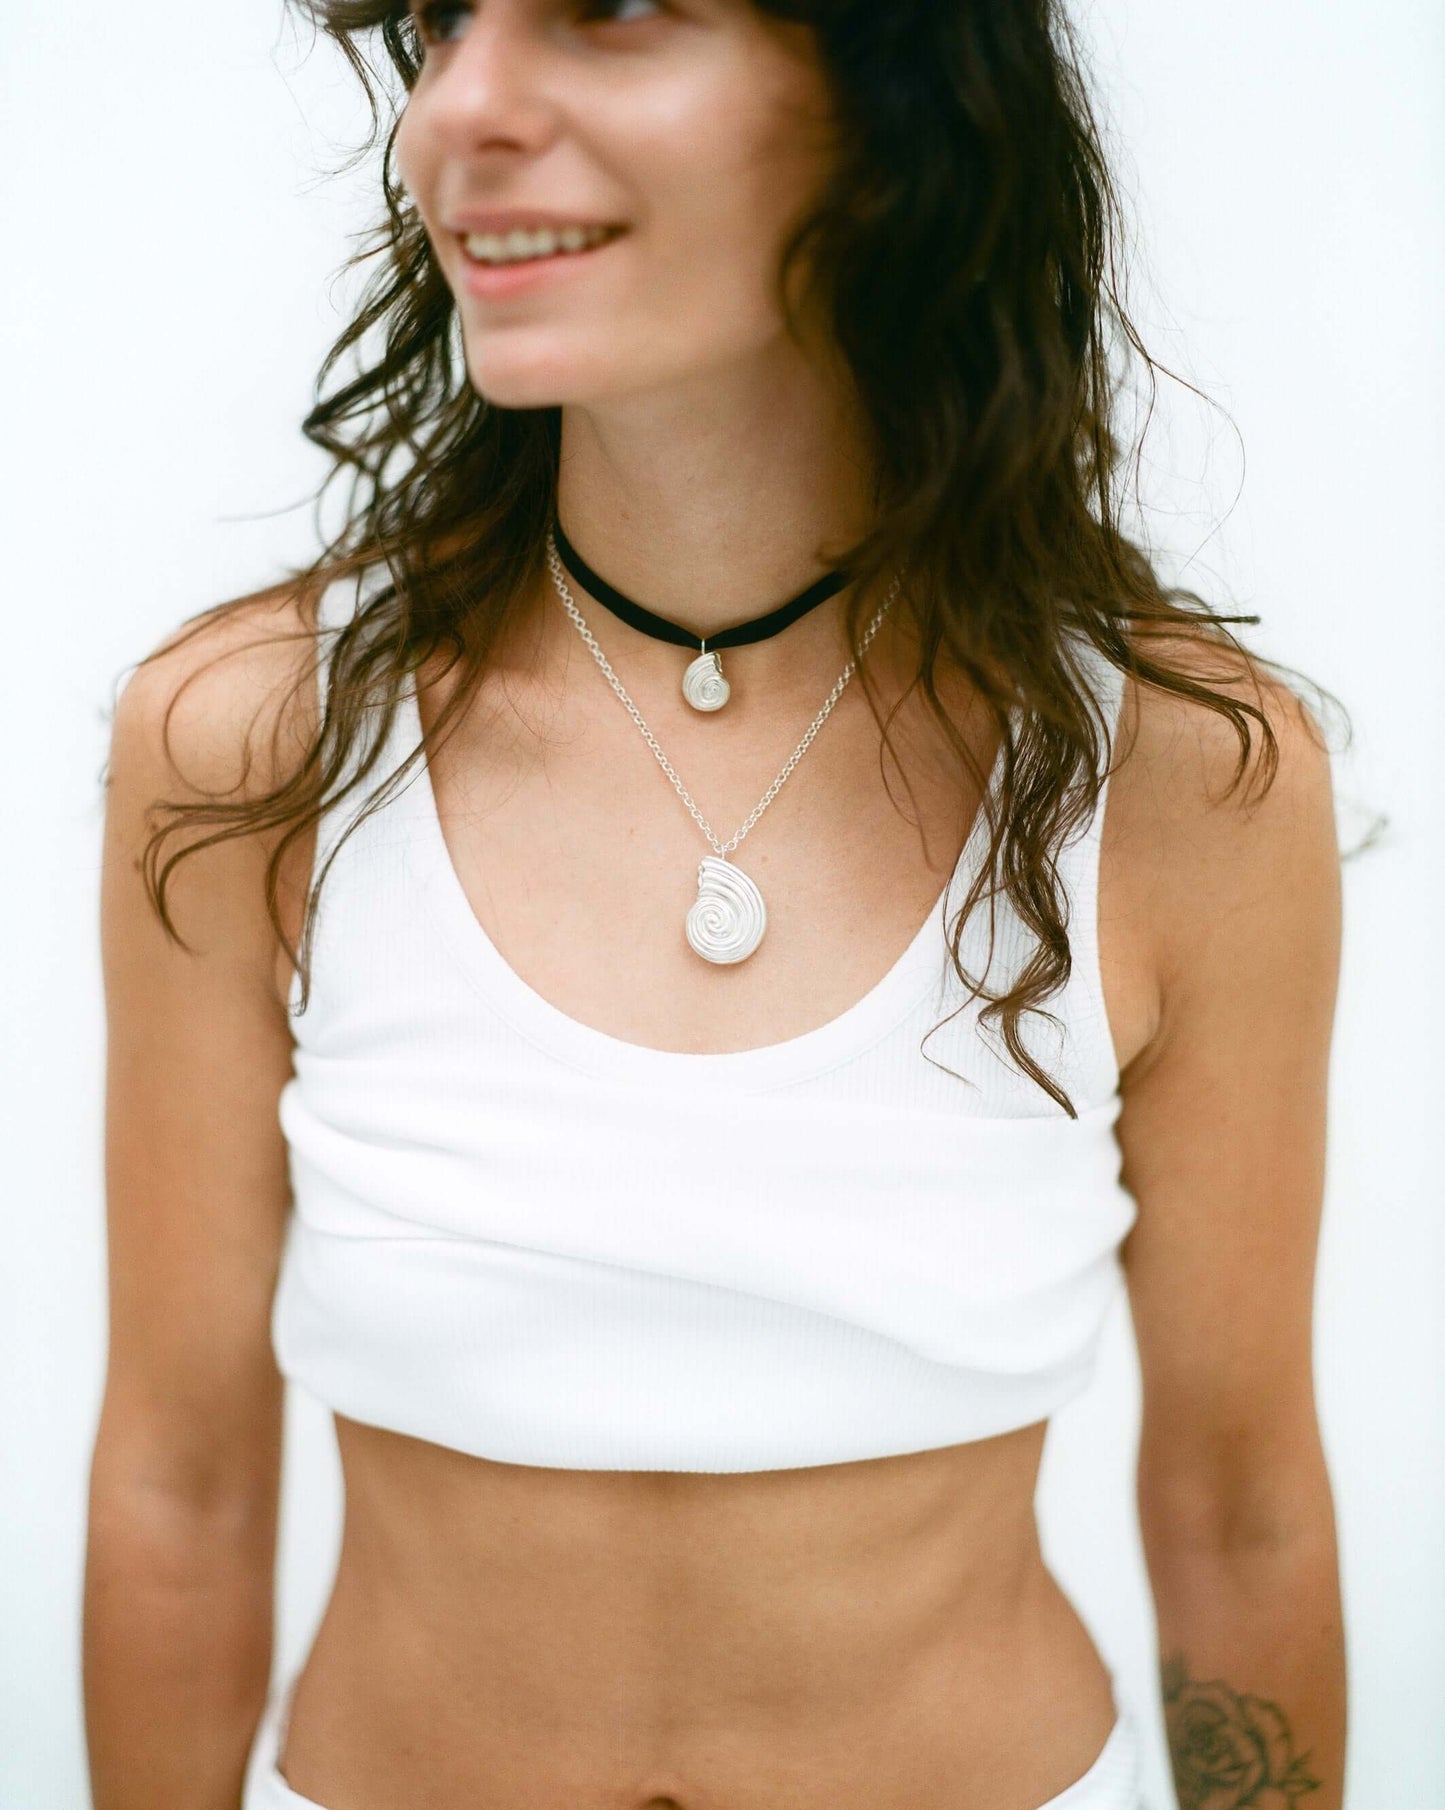 Female model smiling, wearing silver necklaces